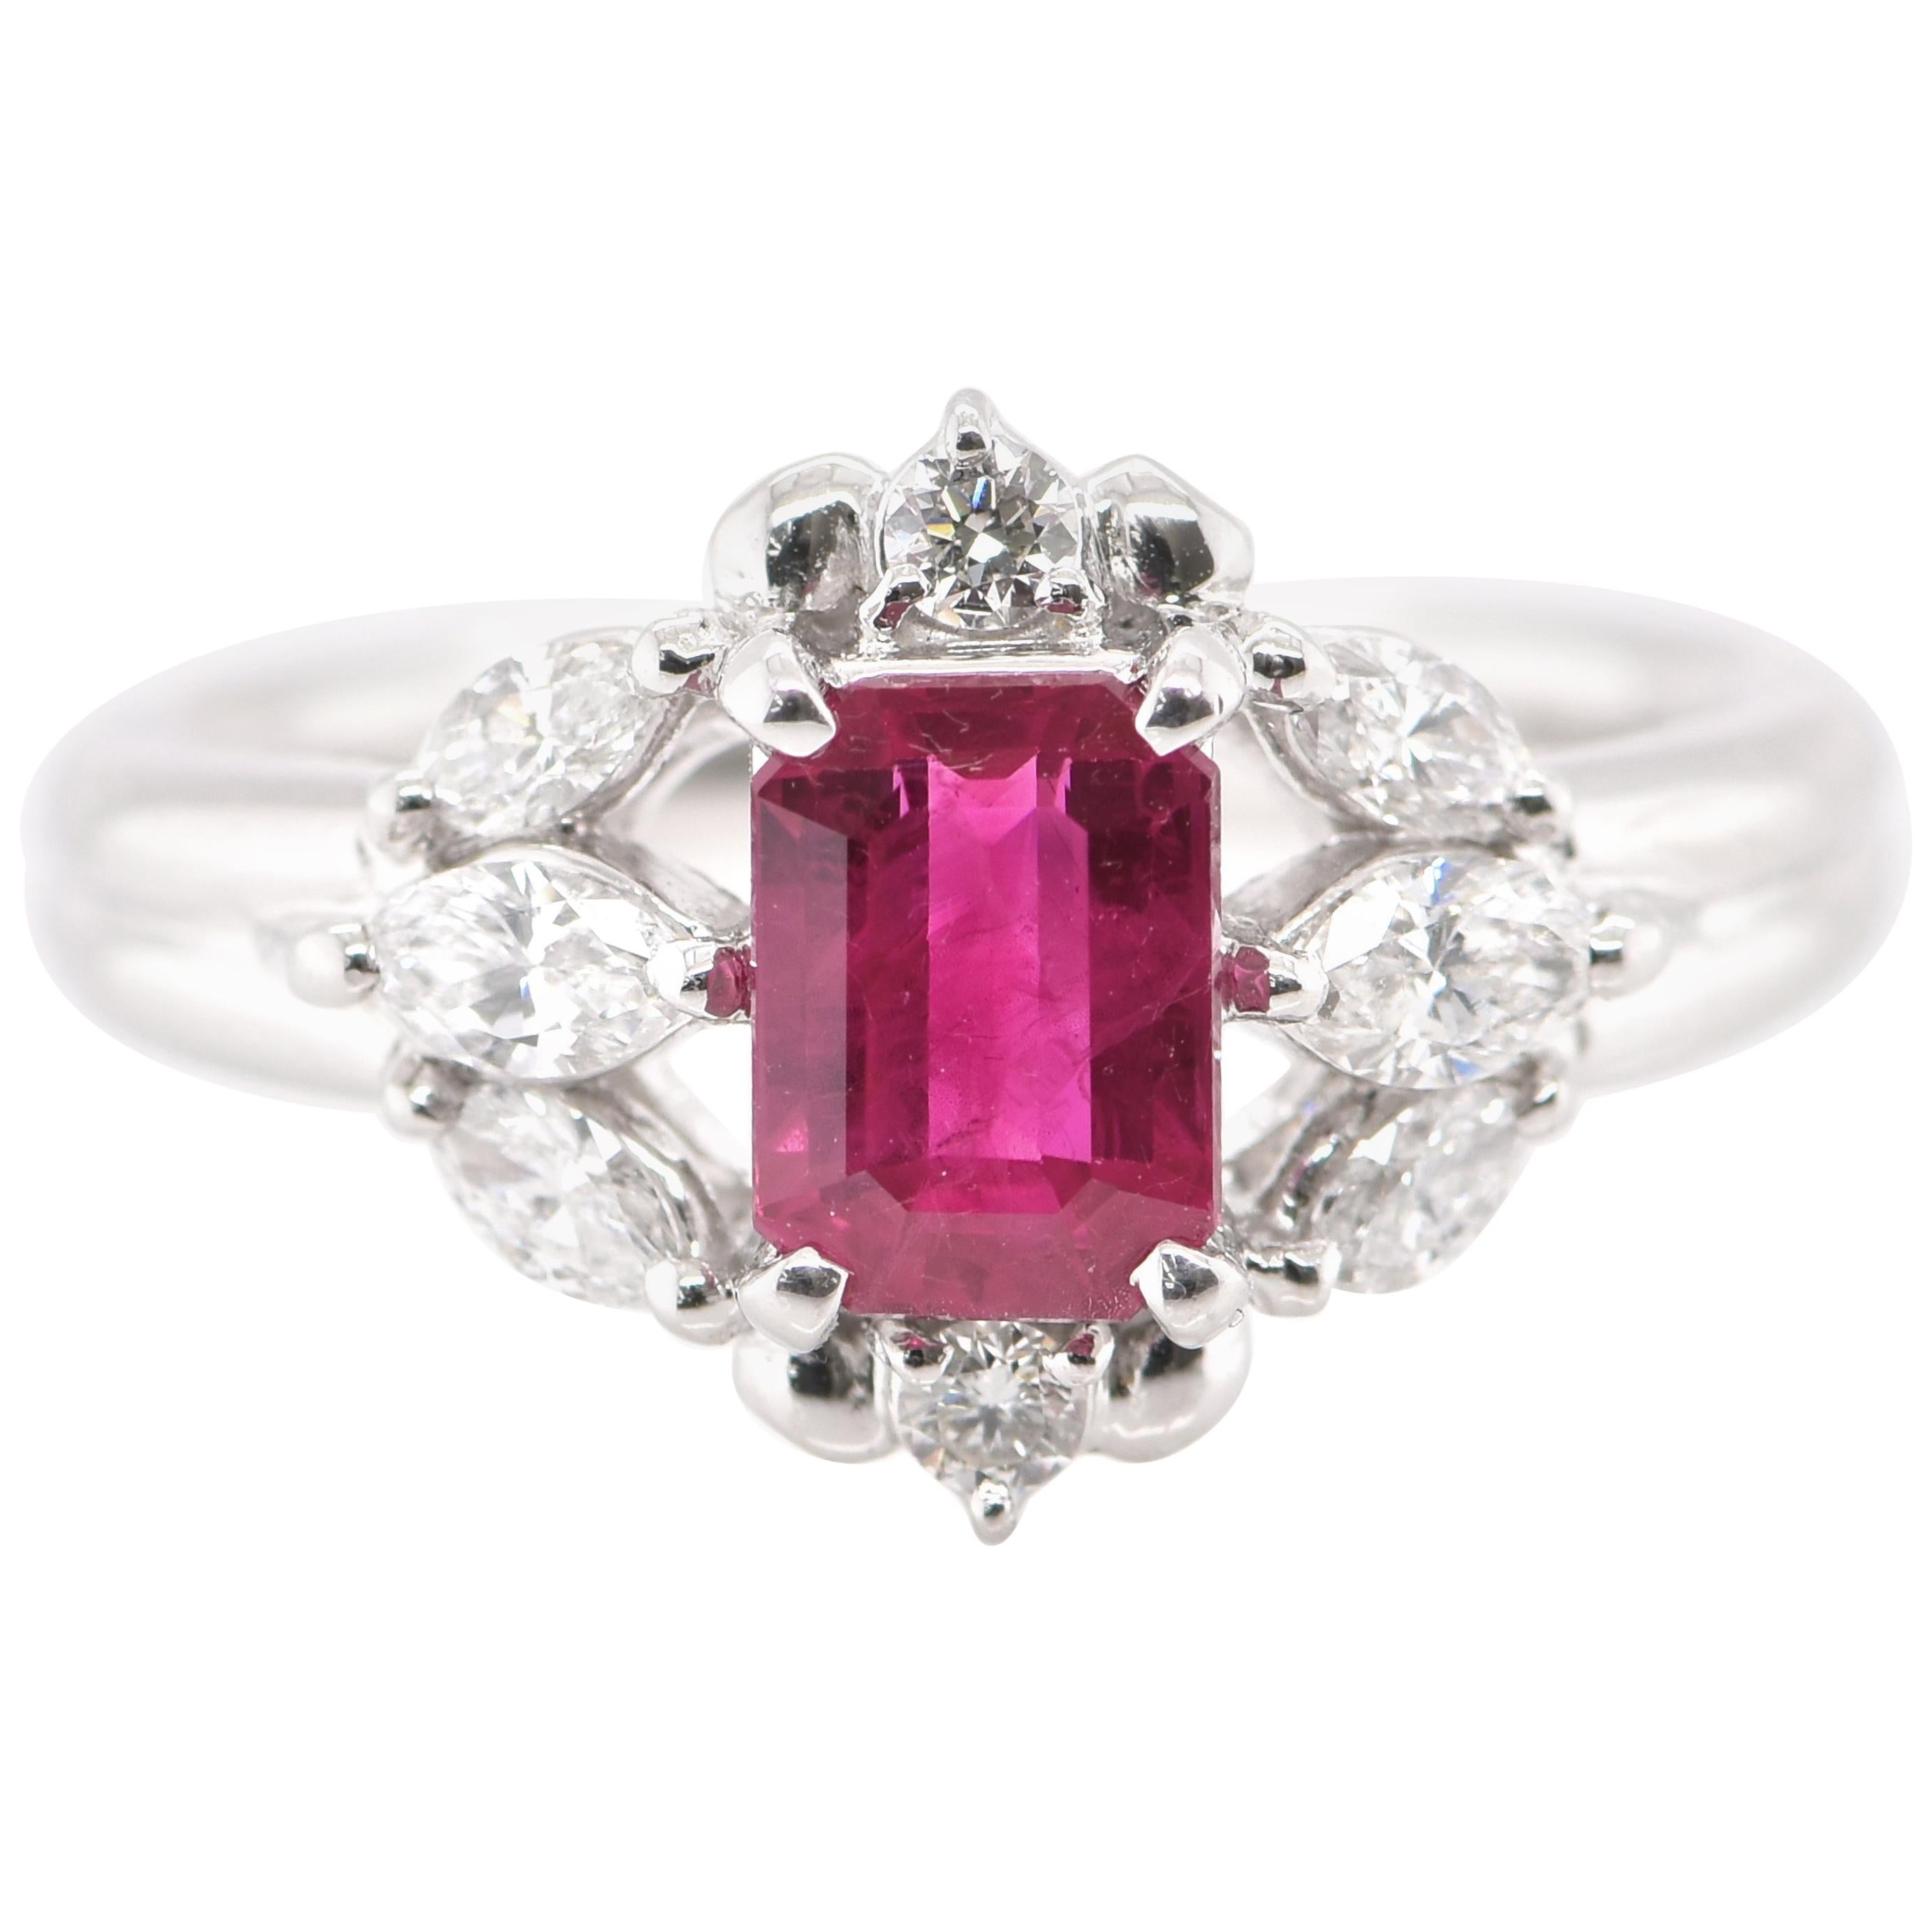 1.47 Carat Natural Octagon-Cut Ruby and Diamond Ring Set in Platinum